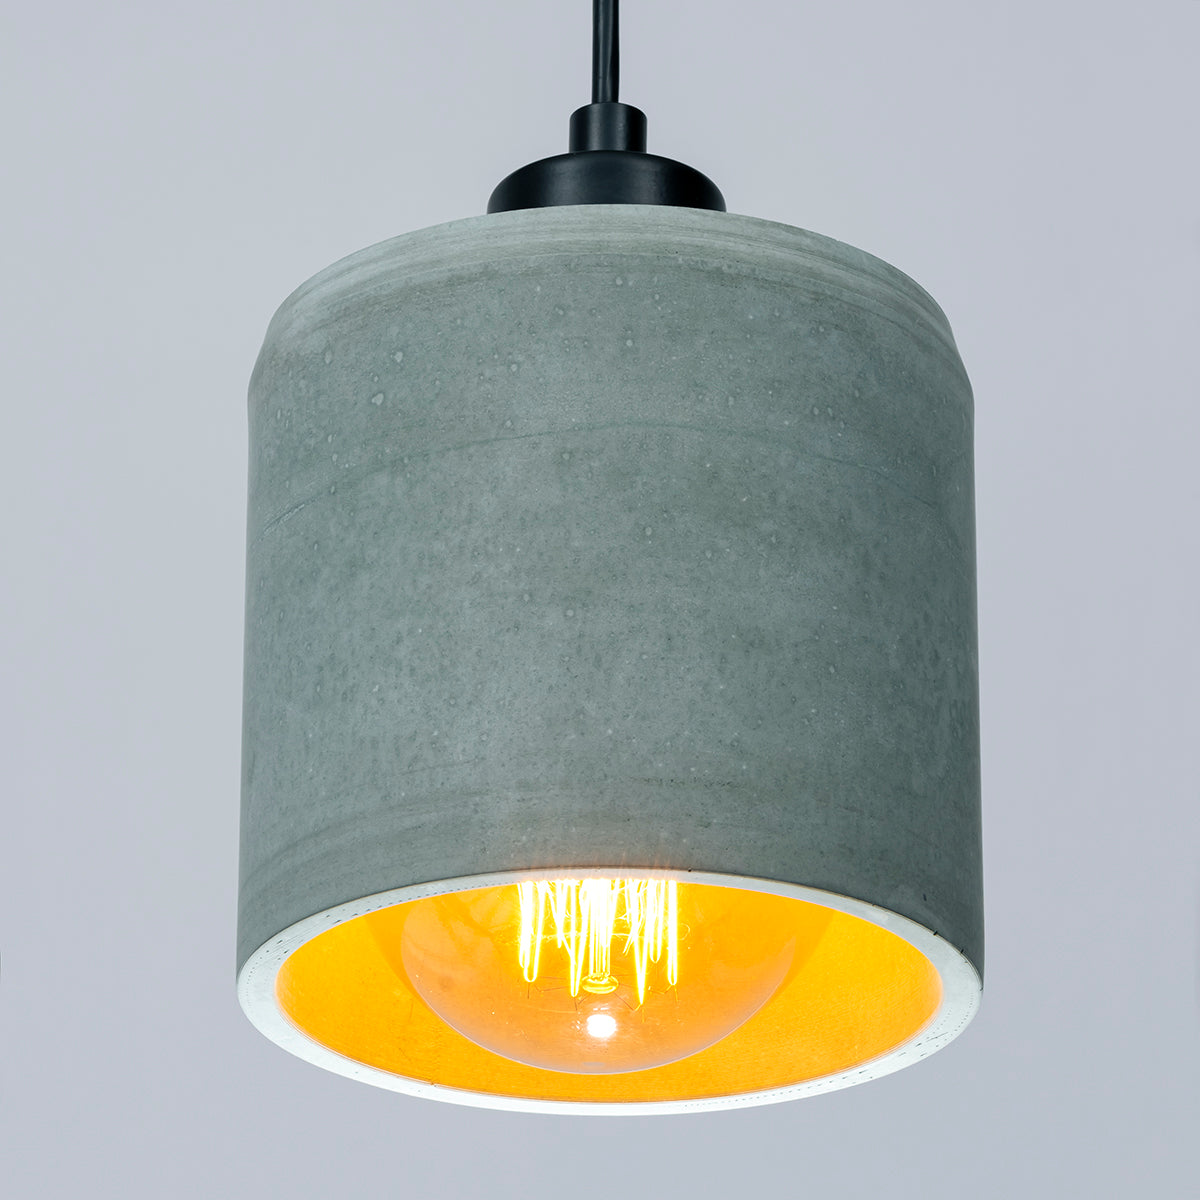 Raw Concrete Cylinder Pendant Lamp with Metal Detail, Modern Pendant Lamp